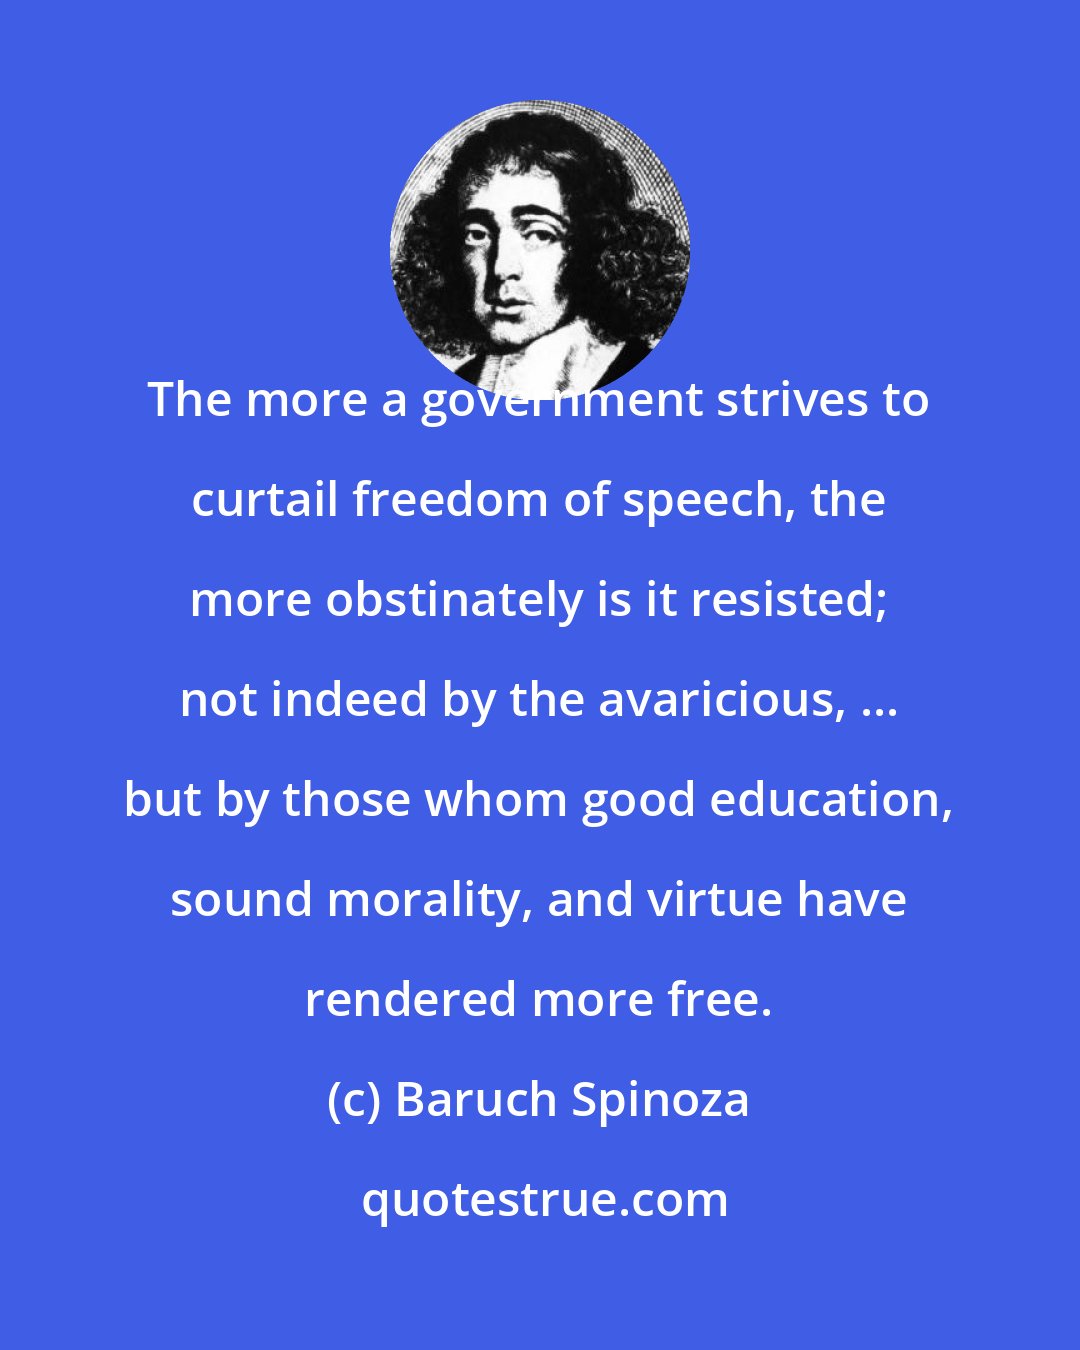 Baruch Spinoza: The more a government strives to curtail freedom of speech, the more obstinately is it resisted; not indeed by the avaricious, ... but by those whom good education, sound morality, and virtue have rendered more free.